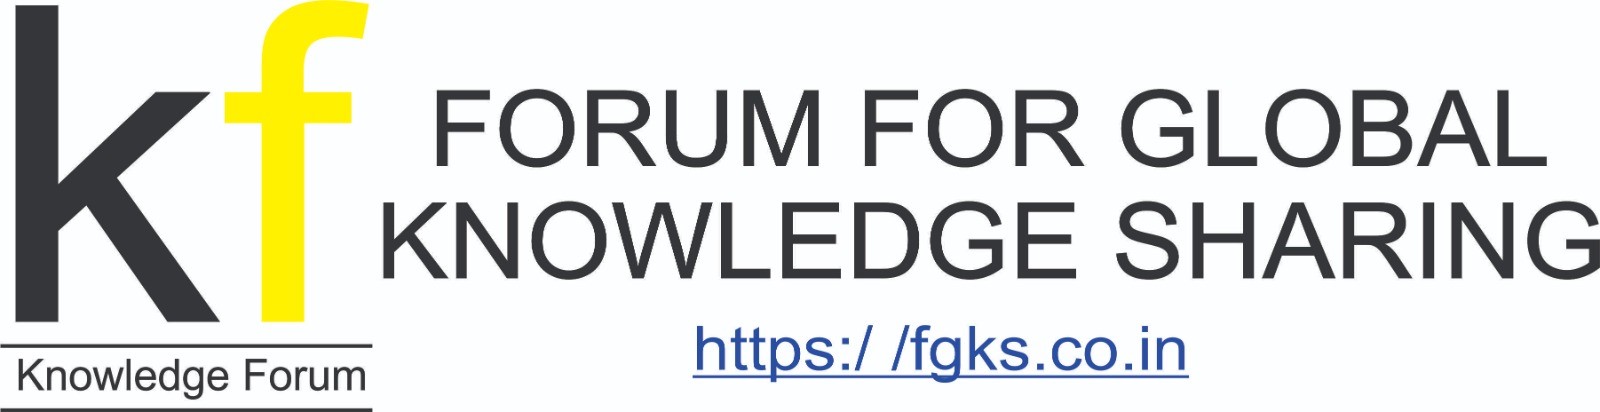 Forum for Global Knowledge Sharing 